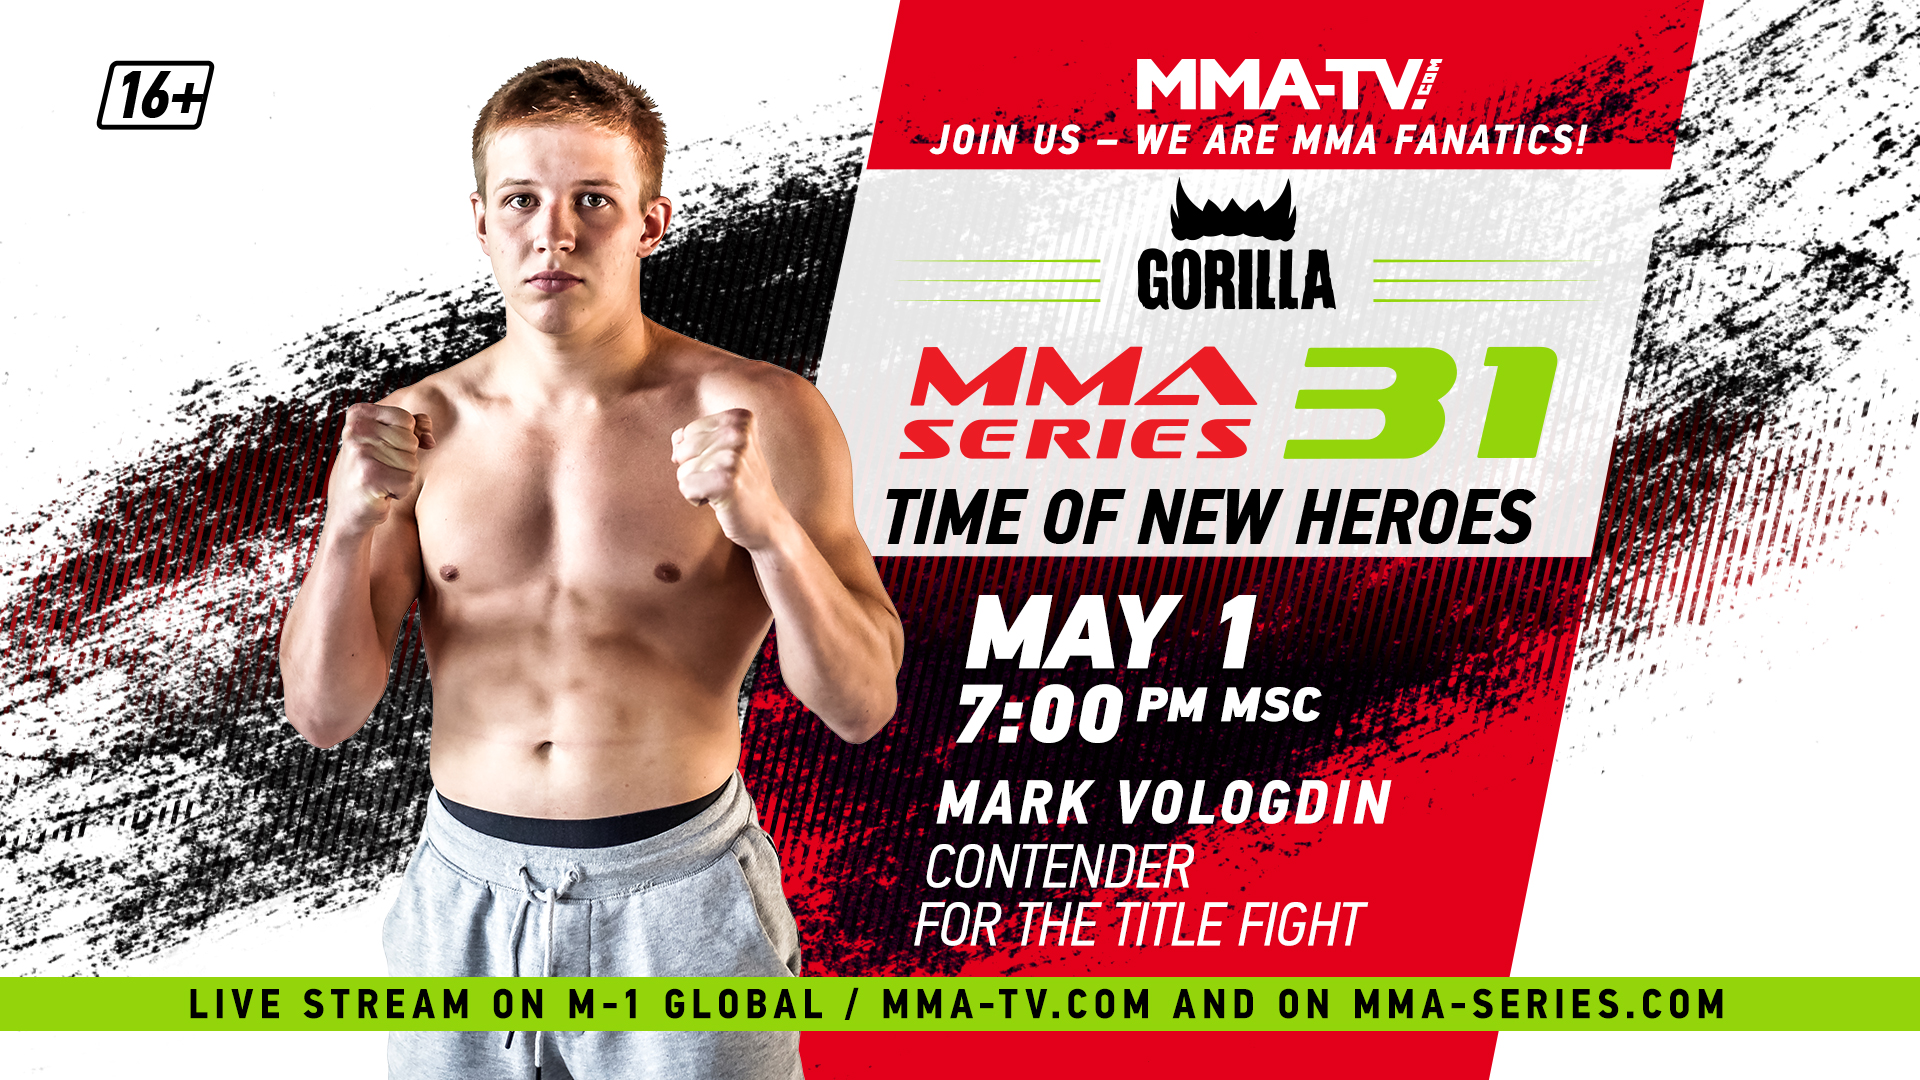 MAY HOLIDAYS WITH GORILLA MMA SERIES THE 31ST EVENT WILL BE HELD ON LABOR DAY MMA Series official website